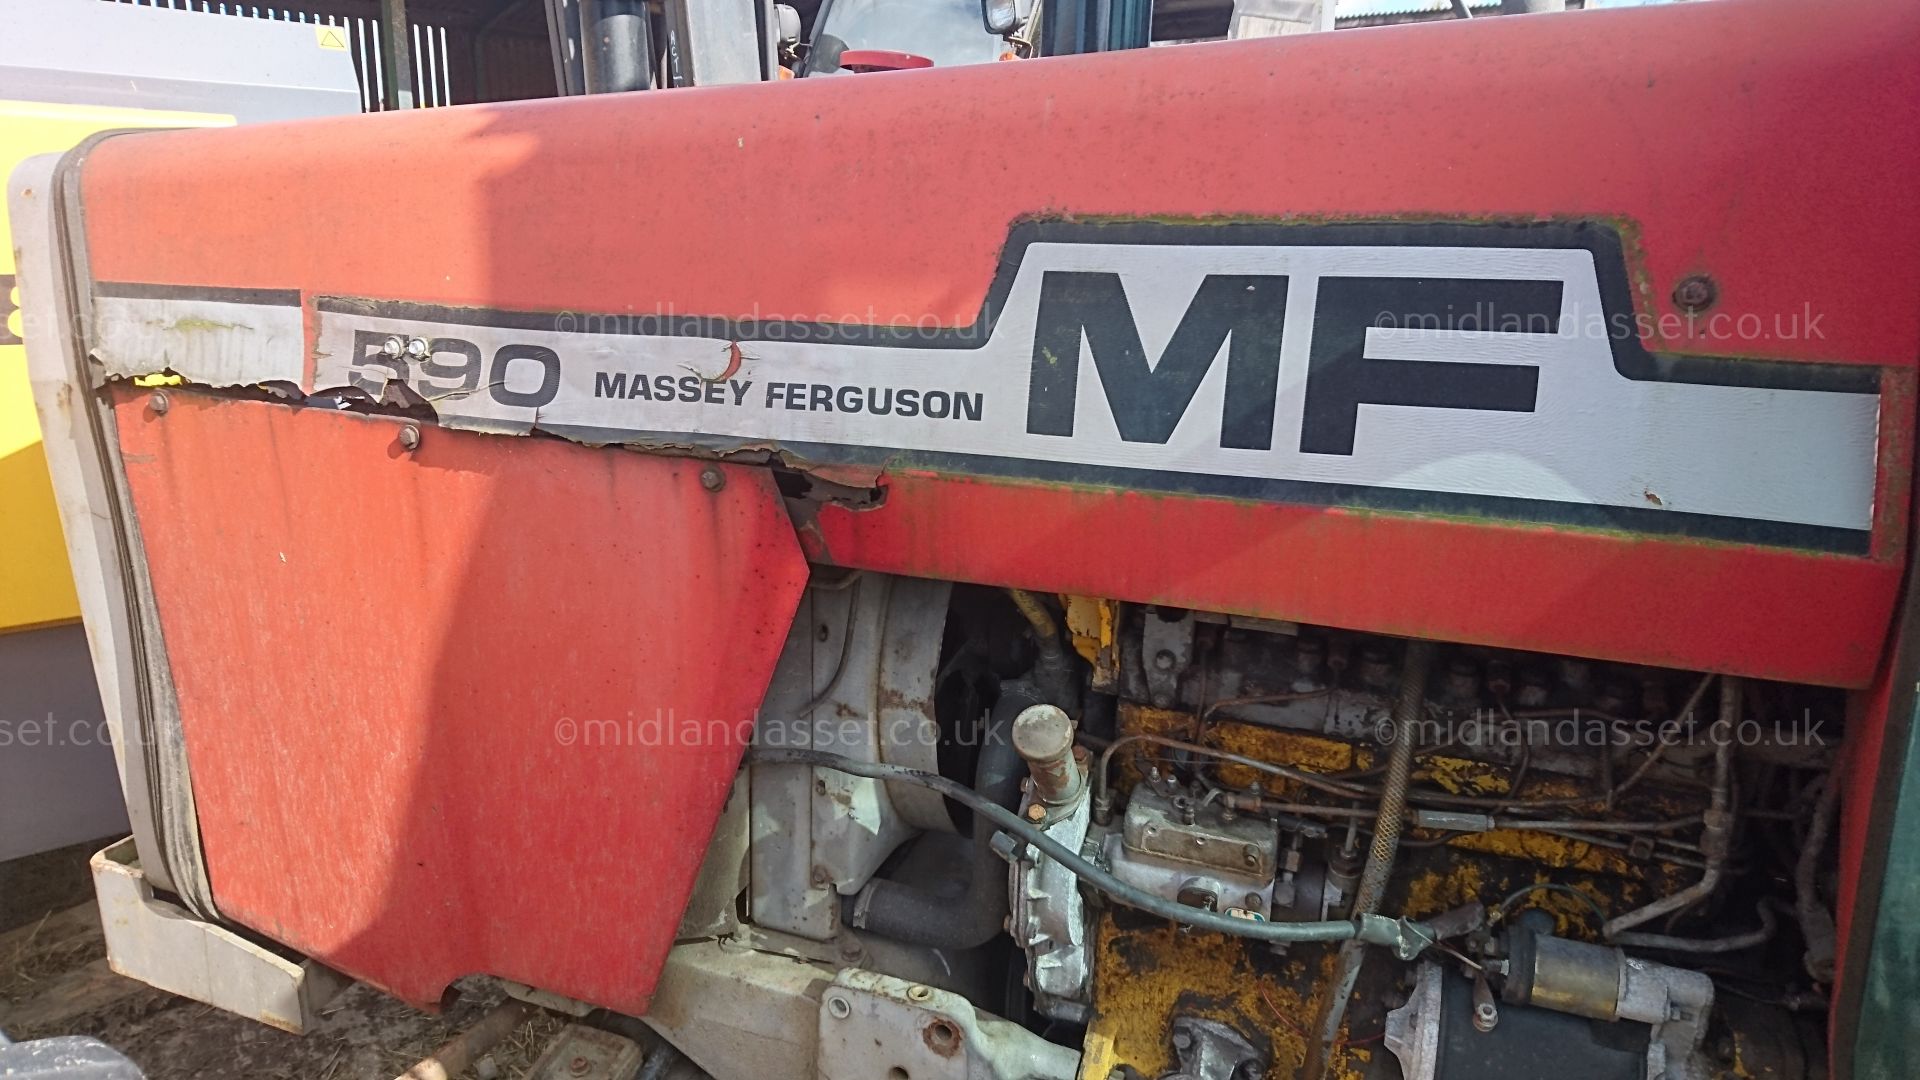 DS - MASSEY FERGUSON 590 4WD 204V TRACTOR   SHOWING 5,640 HOURS (UN-VERIFIED)   COLLECTION FROM - Image 5 of 10